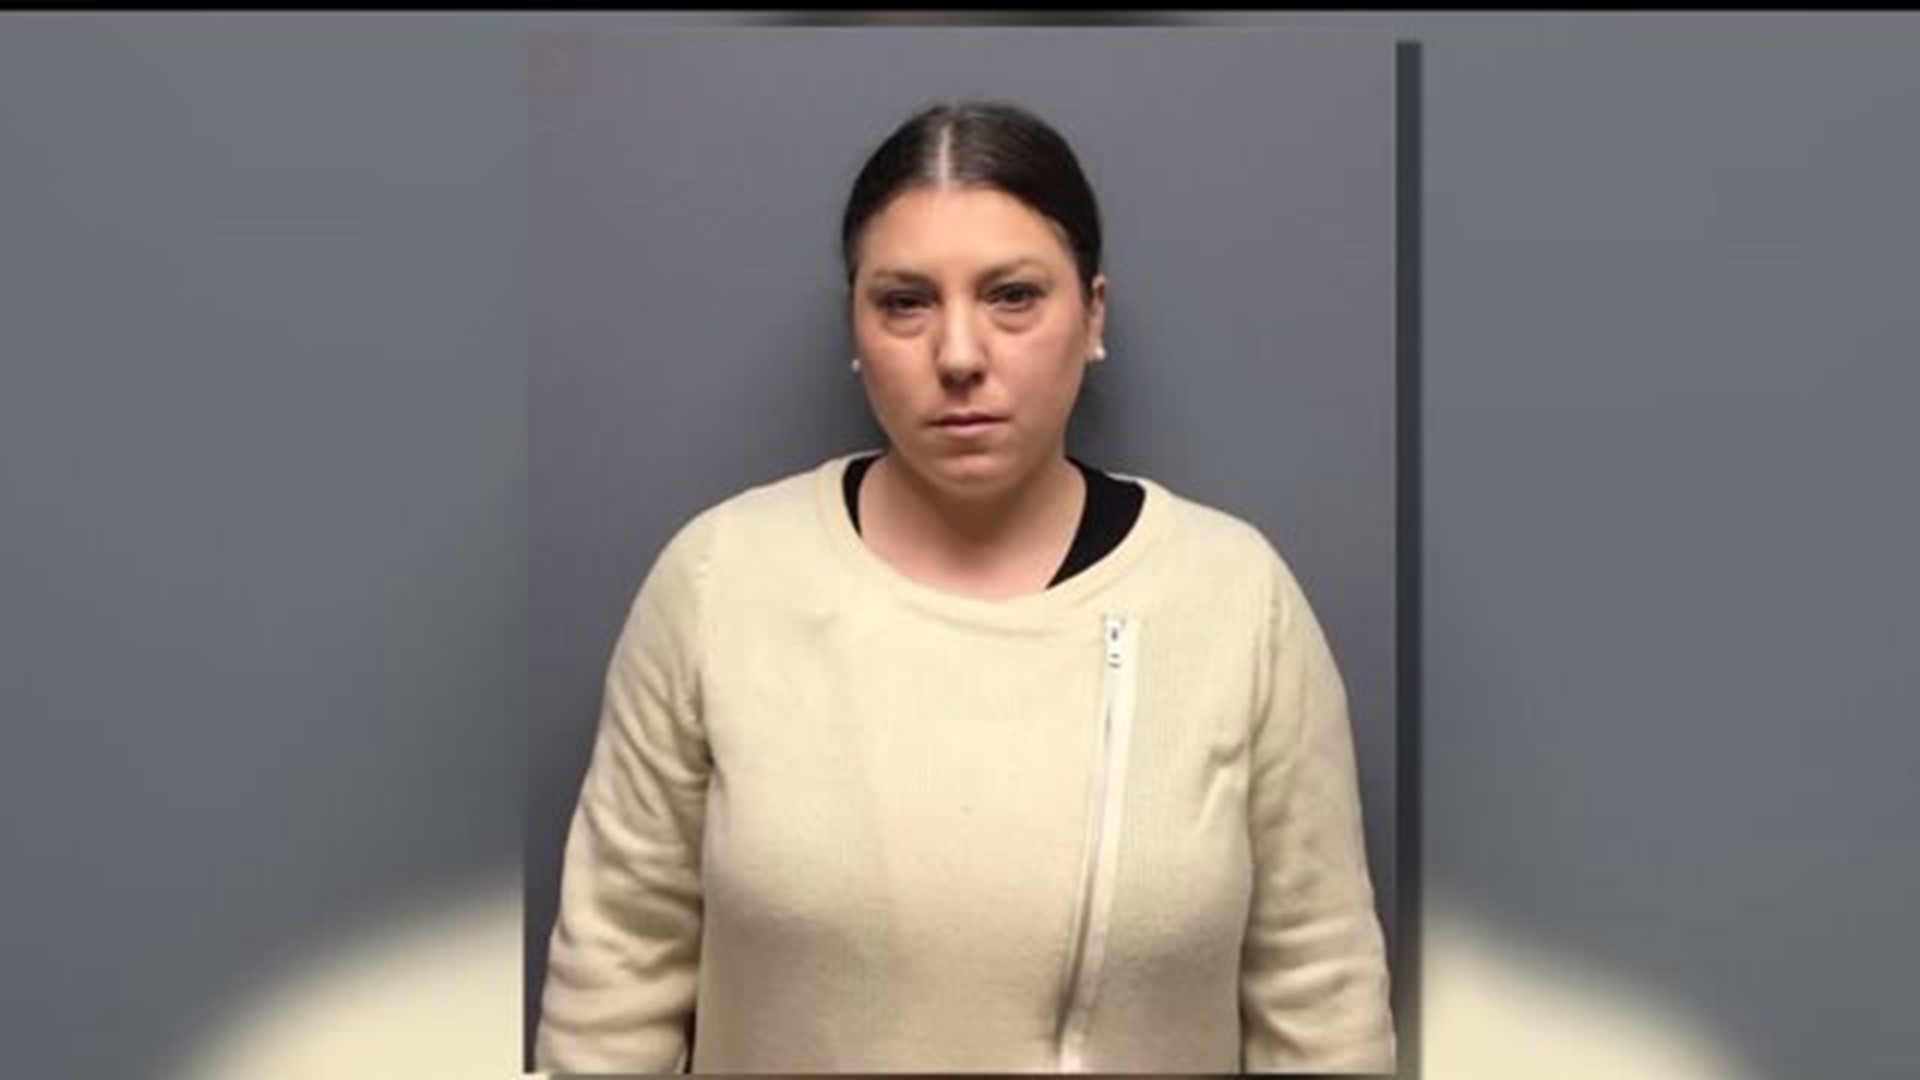 Woman facing charges for fake Gofundme page